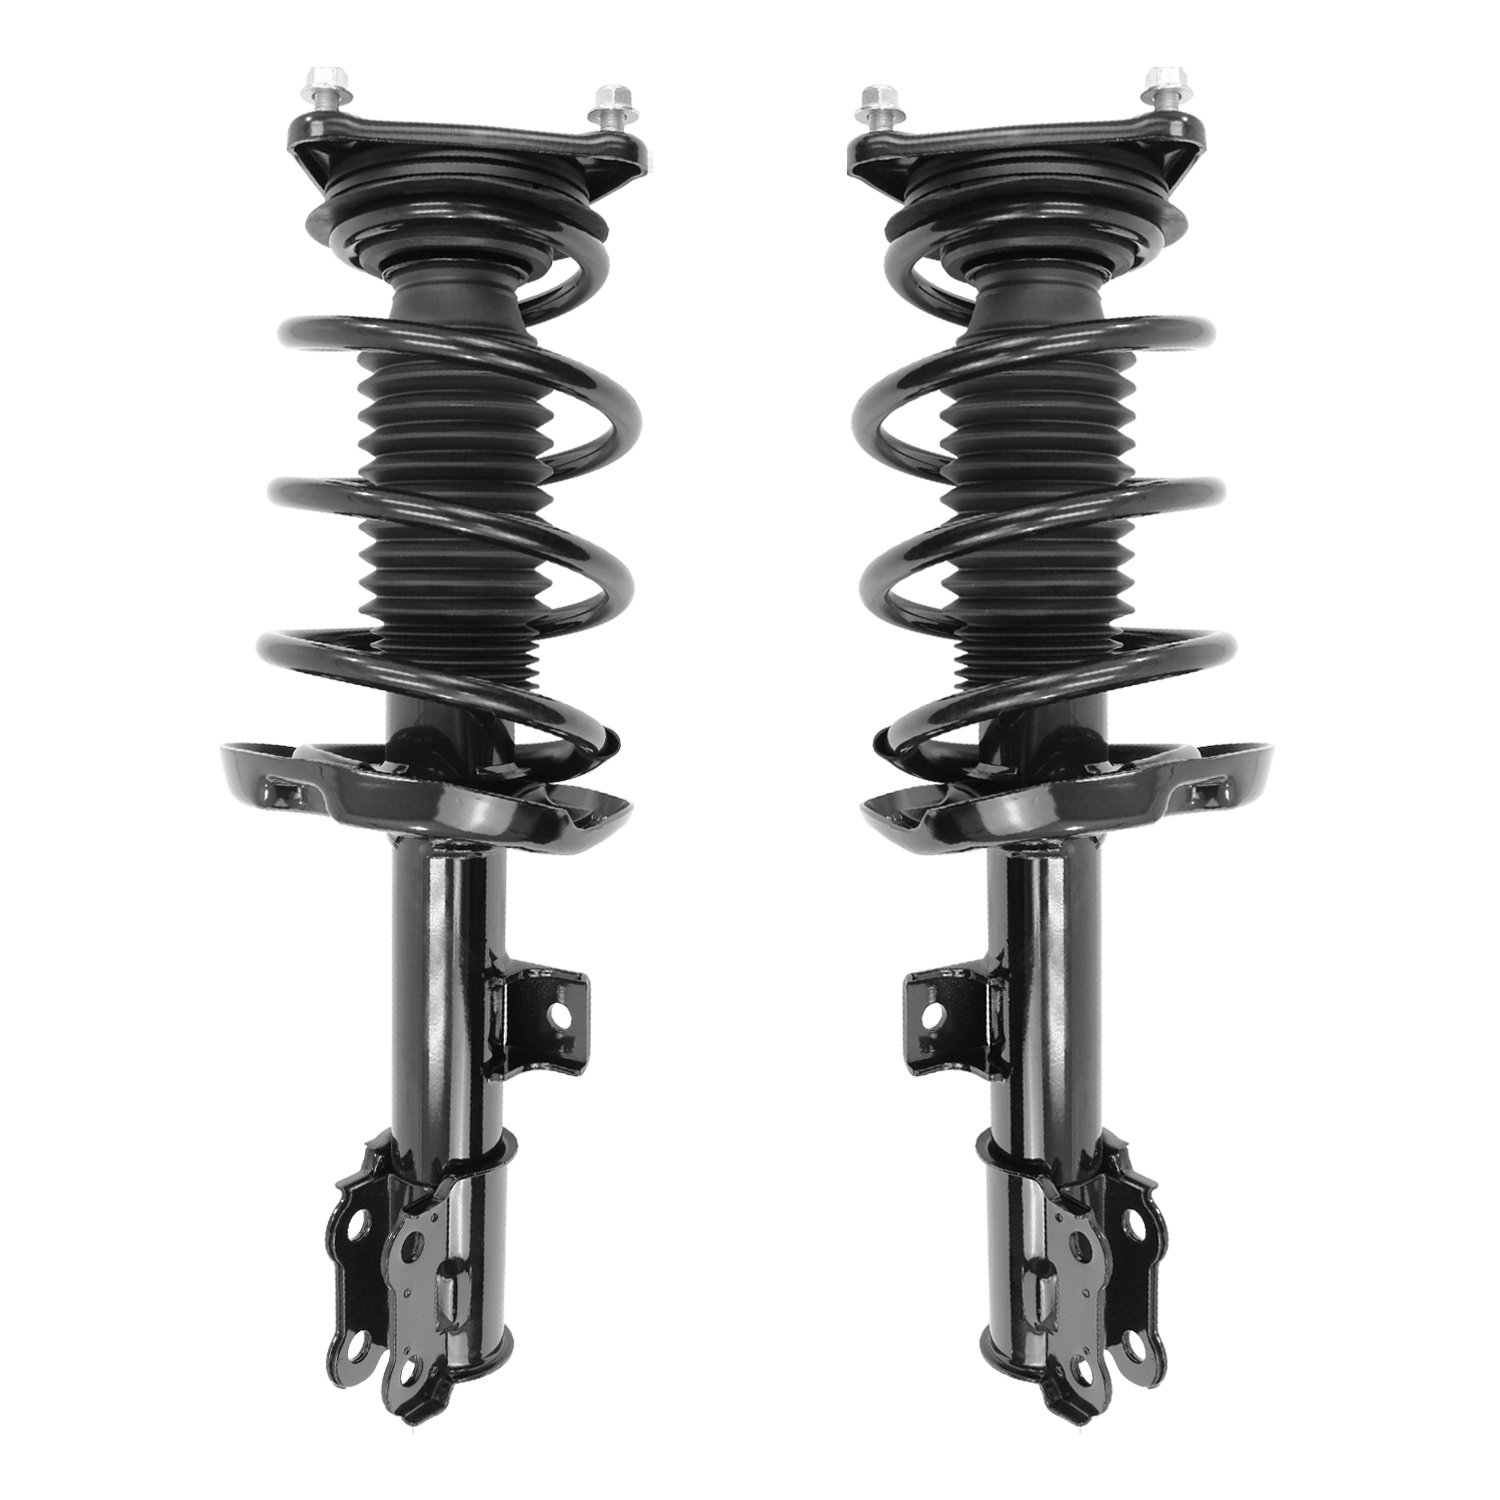 2-13581-13582-001 Front Suspension Strut & Coil Spring Assemby Set Fits Select Hyundai Elantra GT